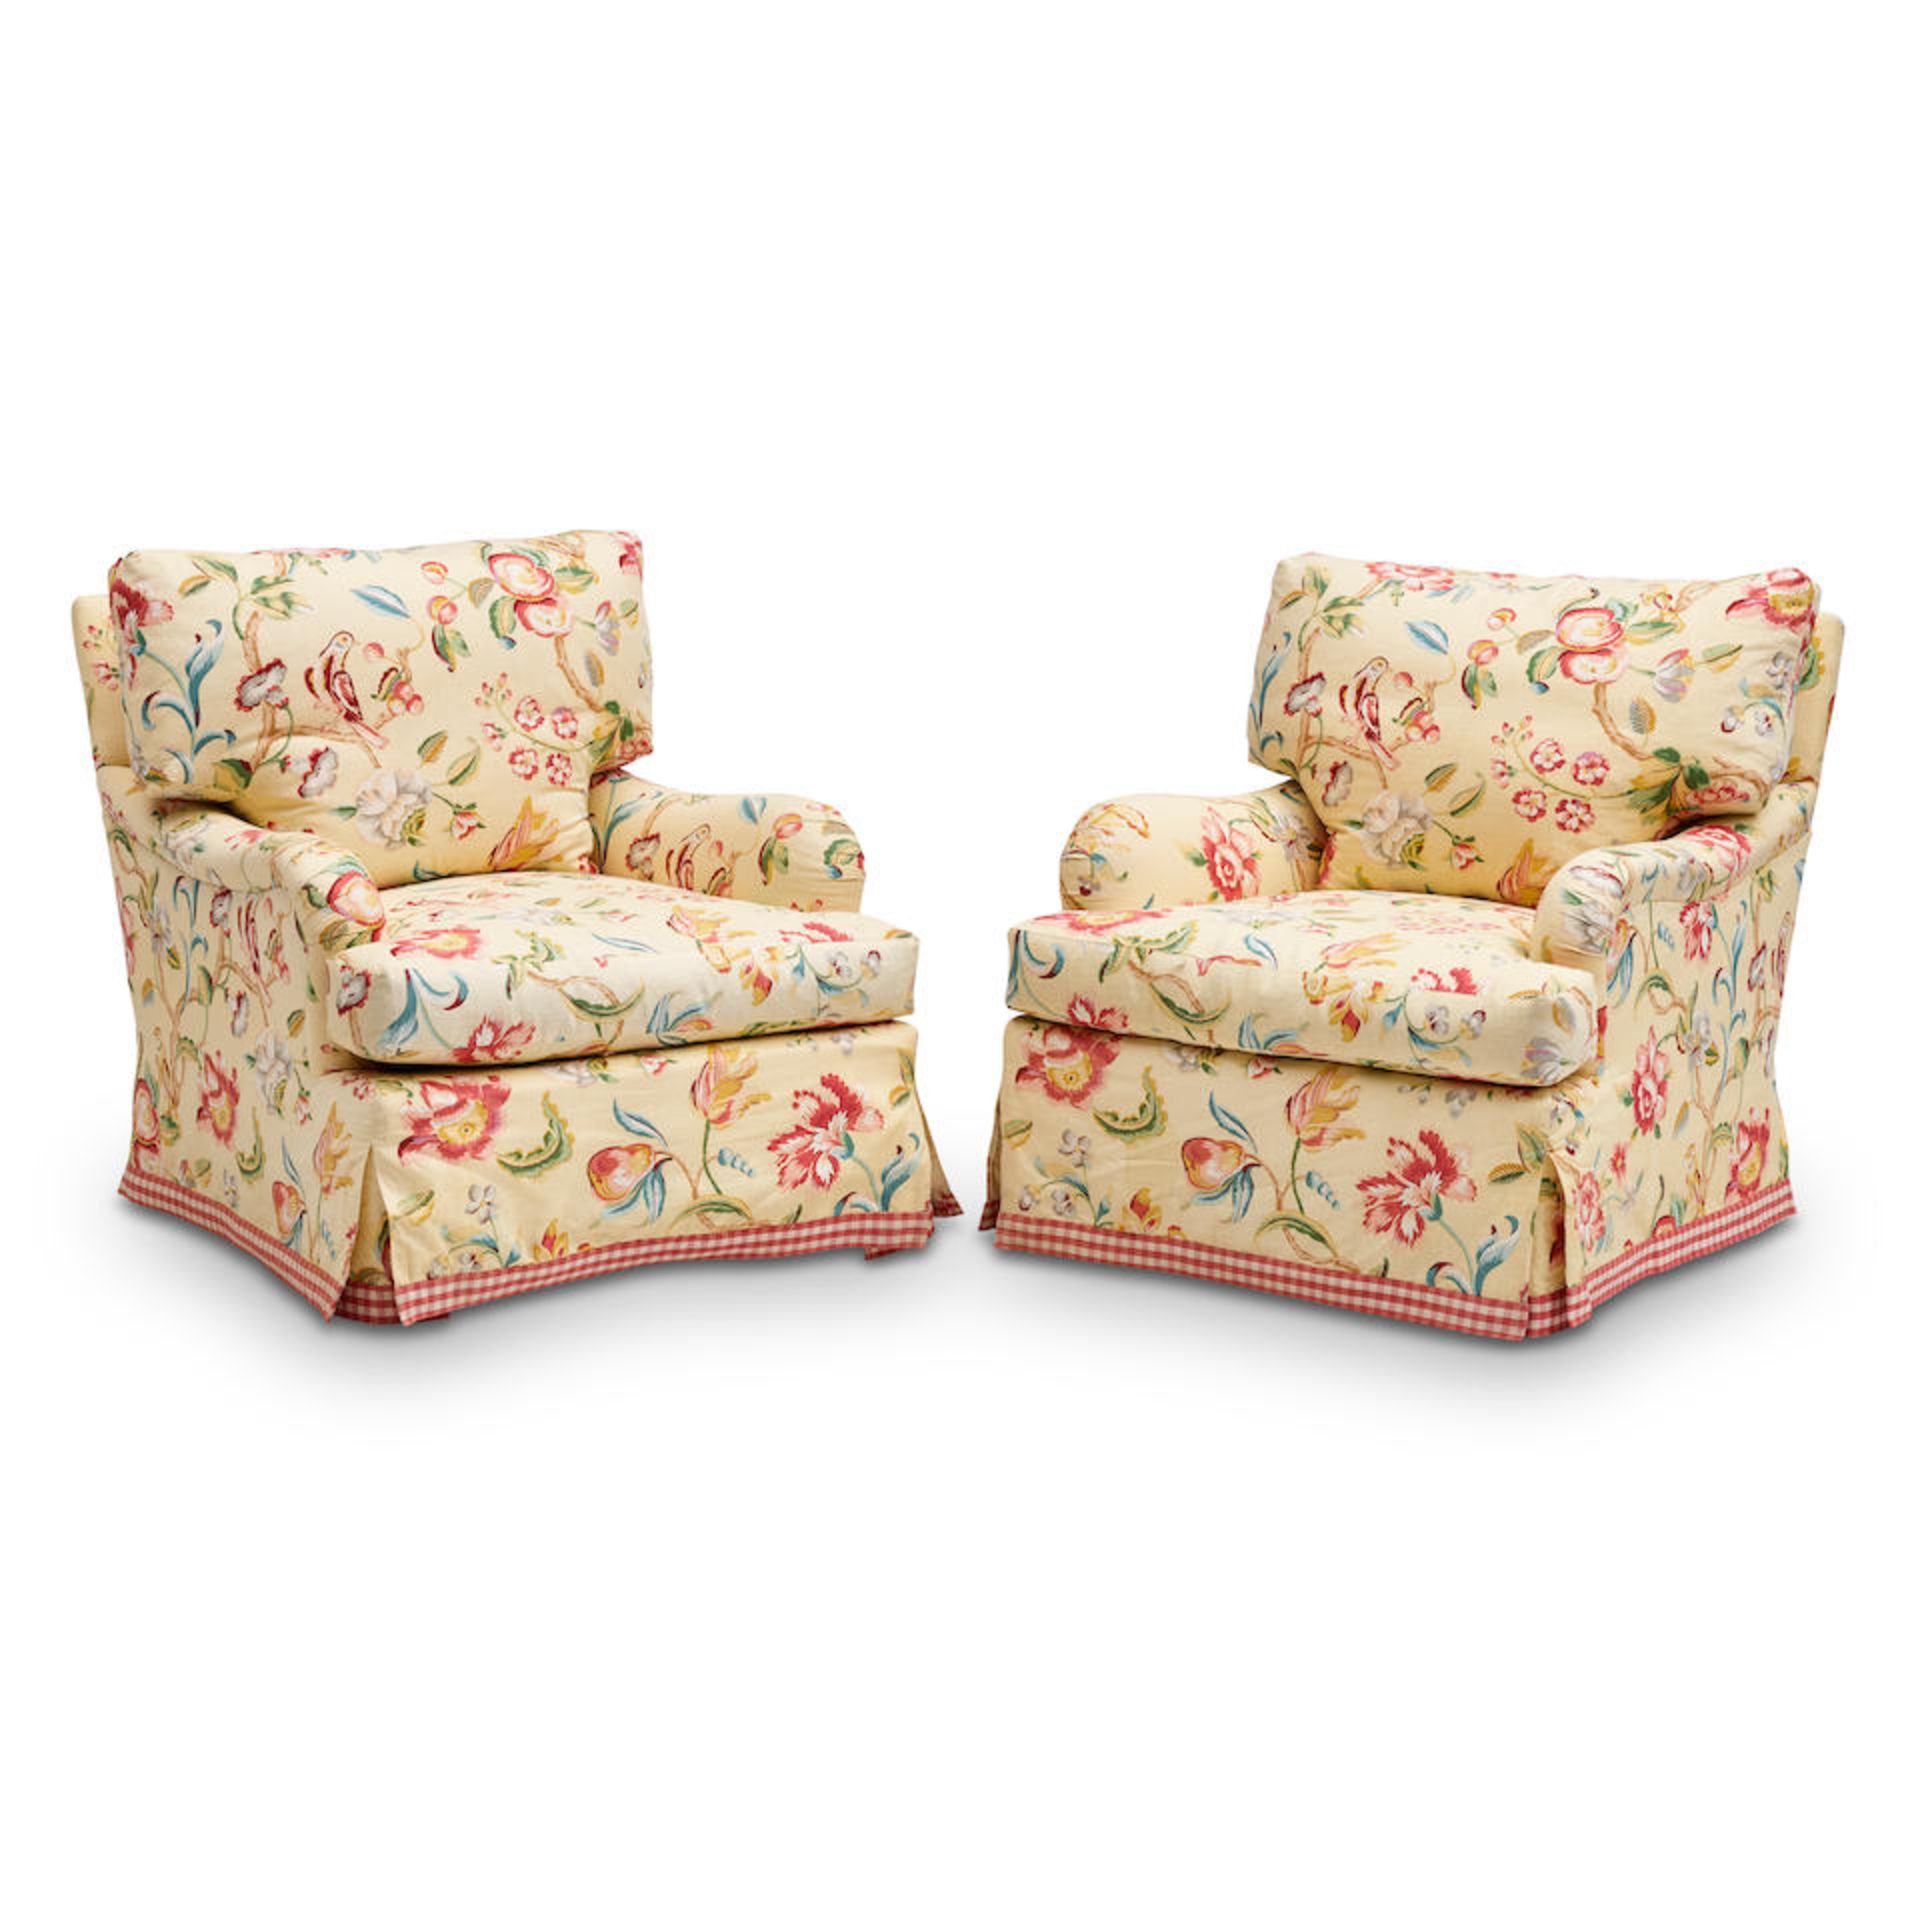 A PAIR OF UPHOLSTERED ARMCHAIRS